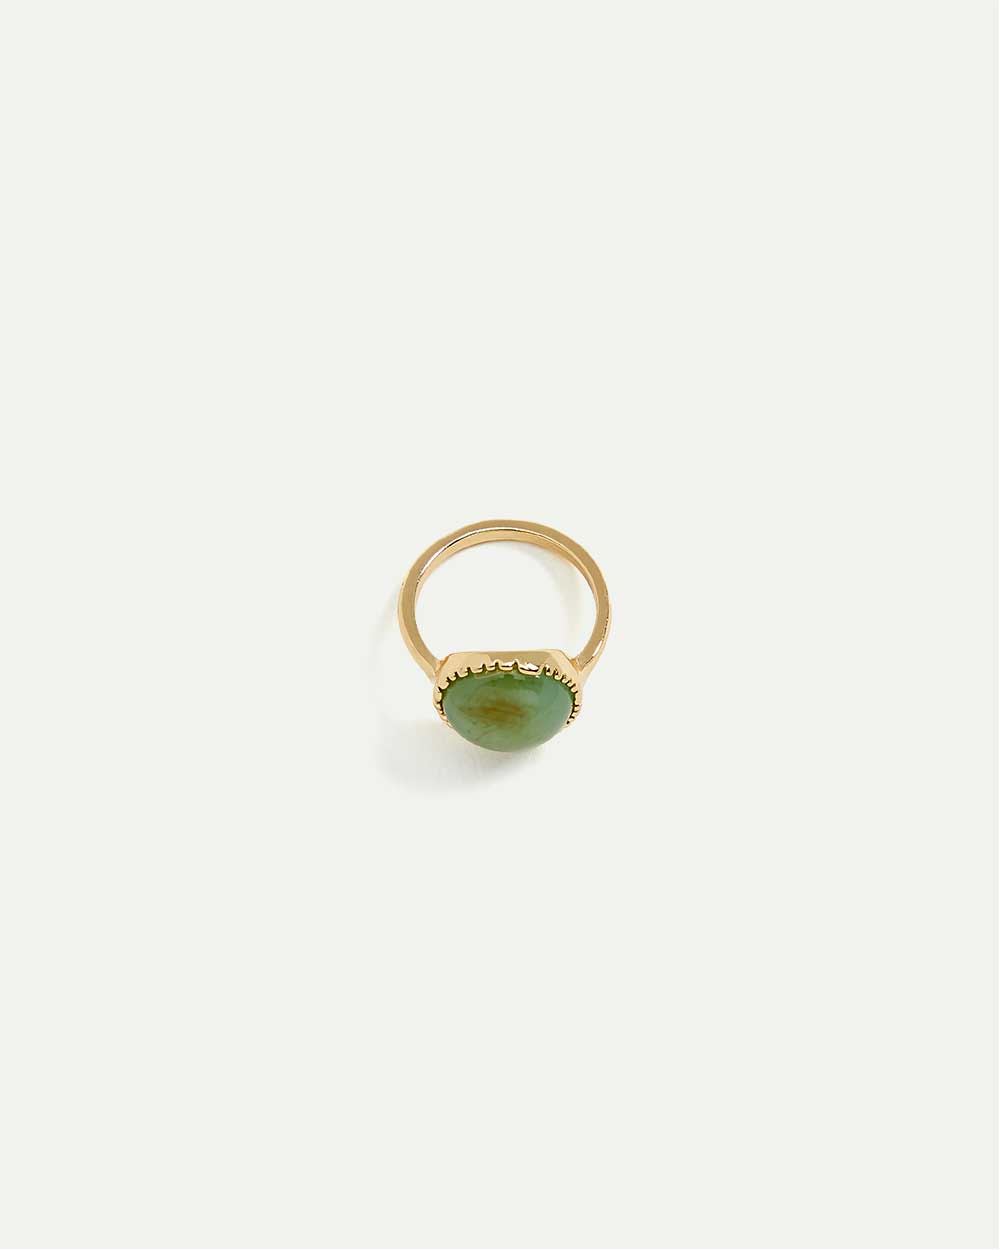 Encrusted Green Stone Ring